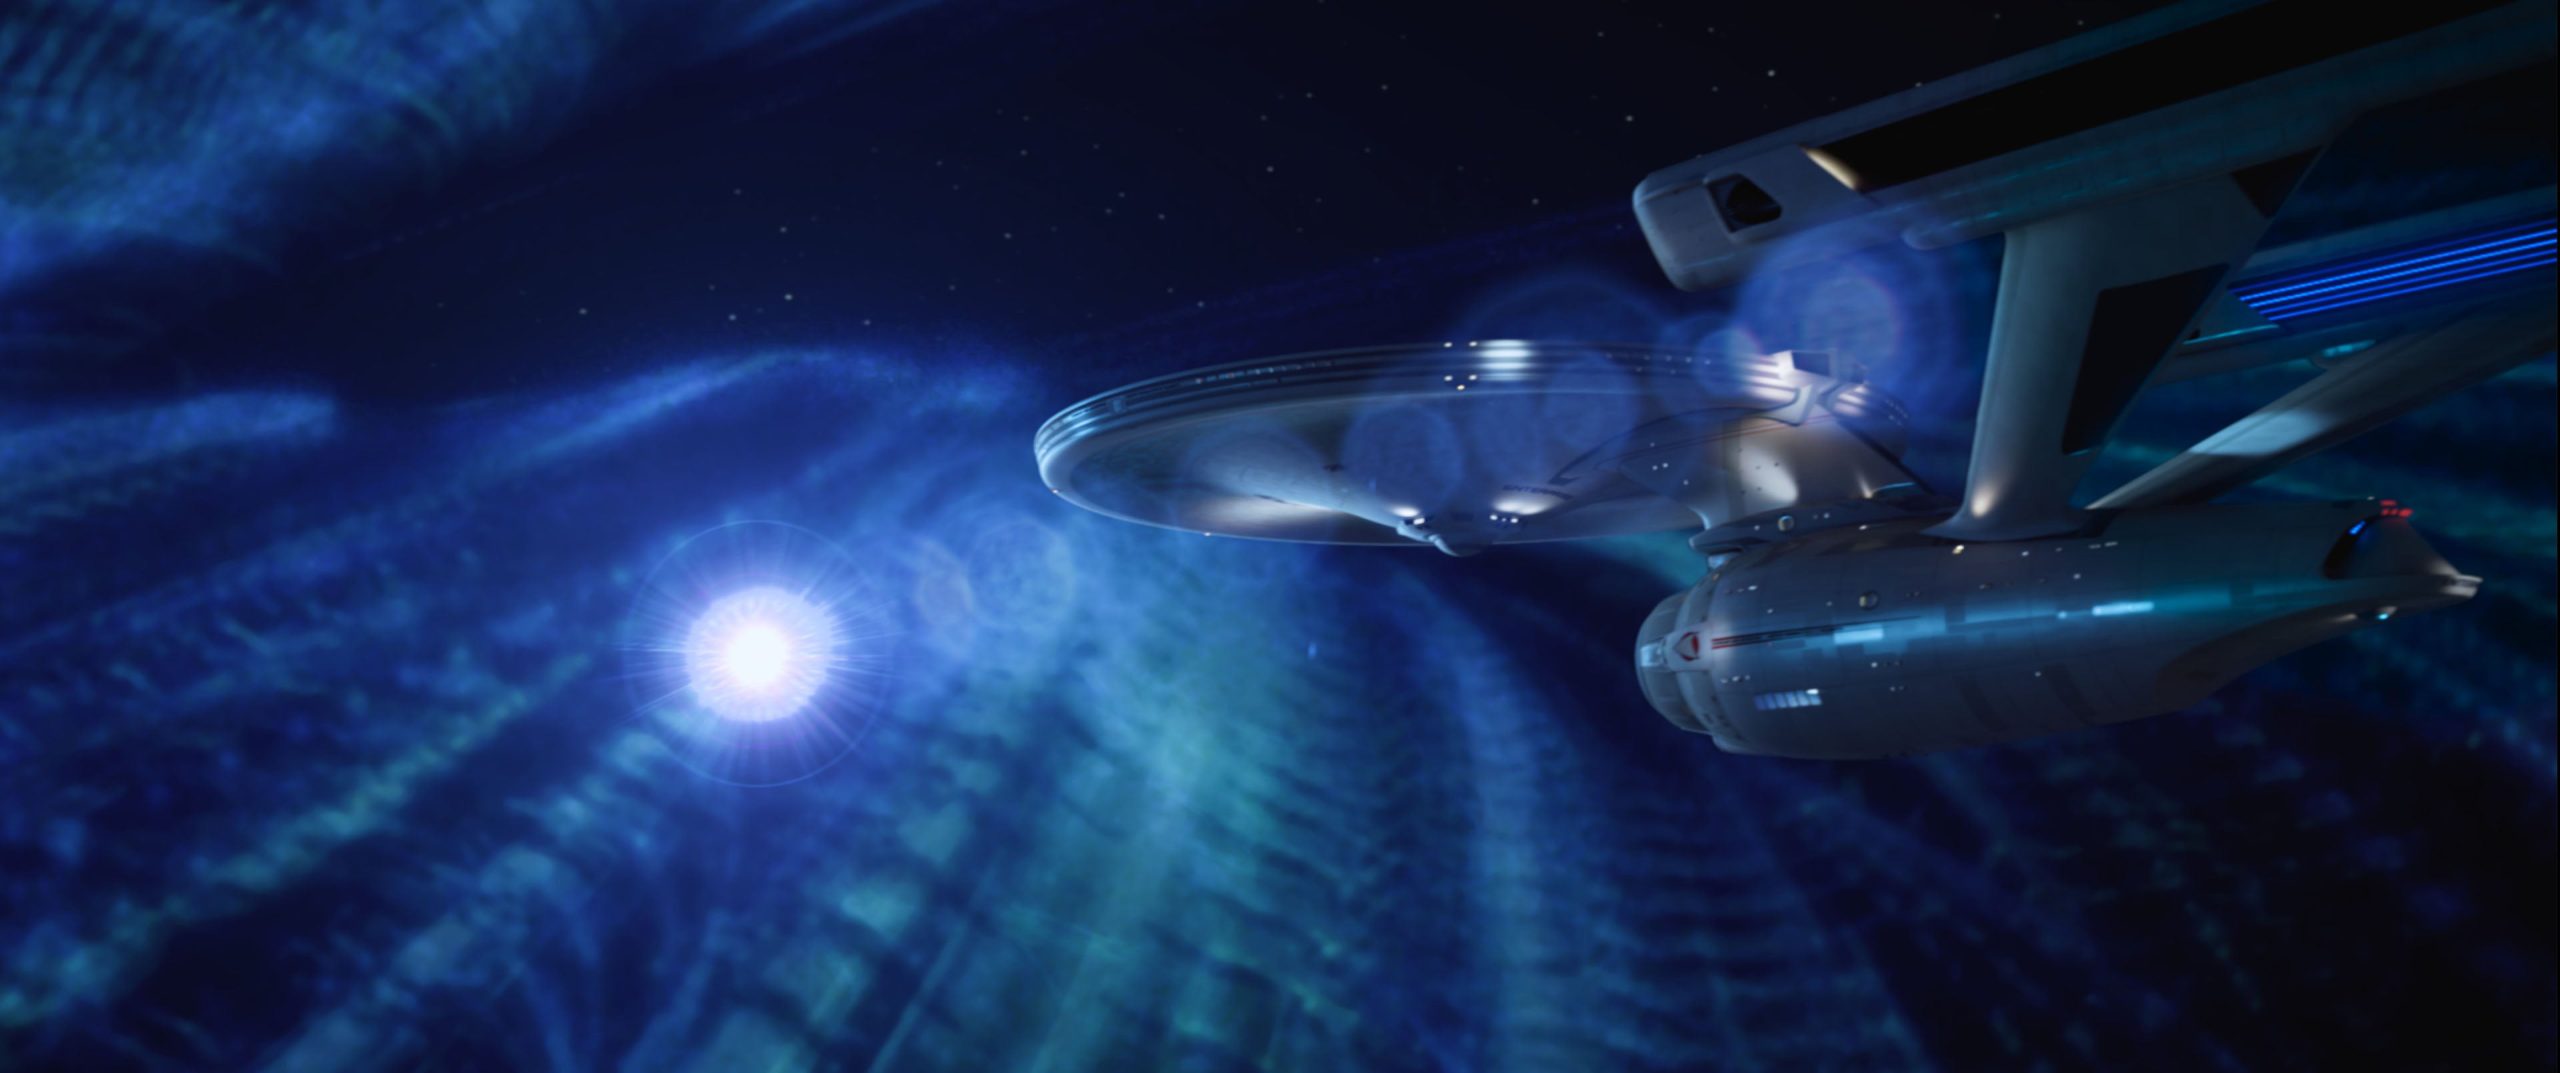 Star Trek: The Motion Picture features deleted scenes in 4K Ultra